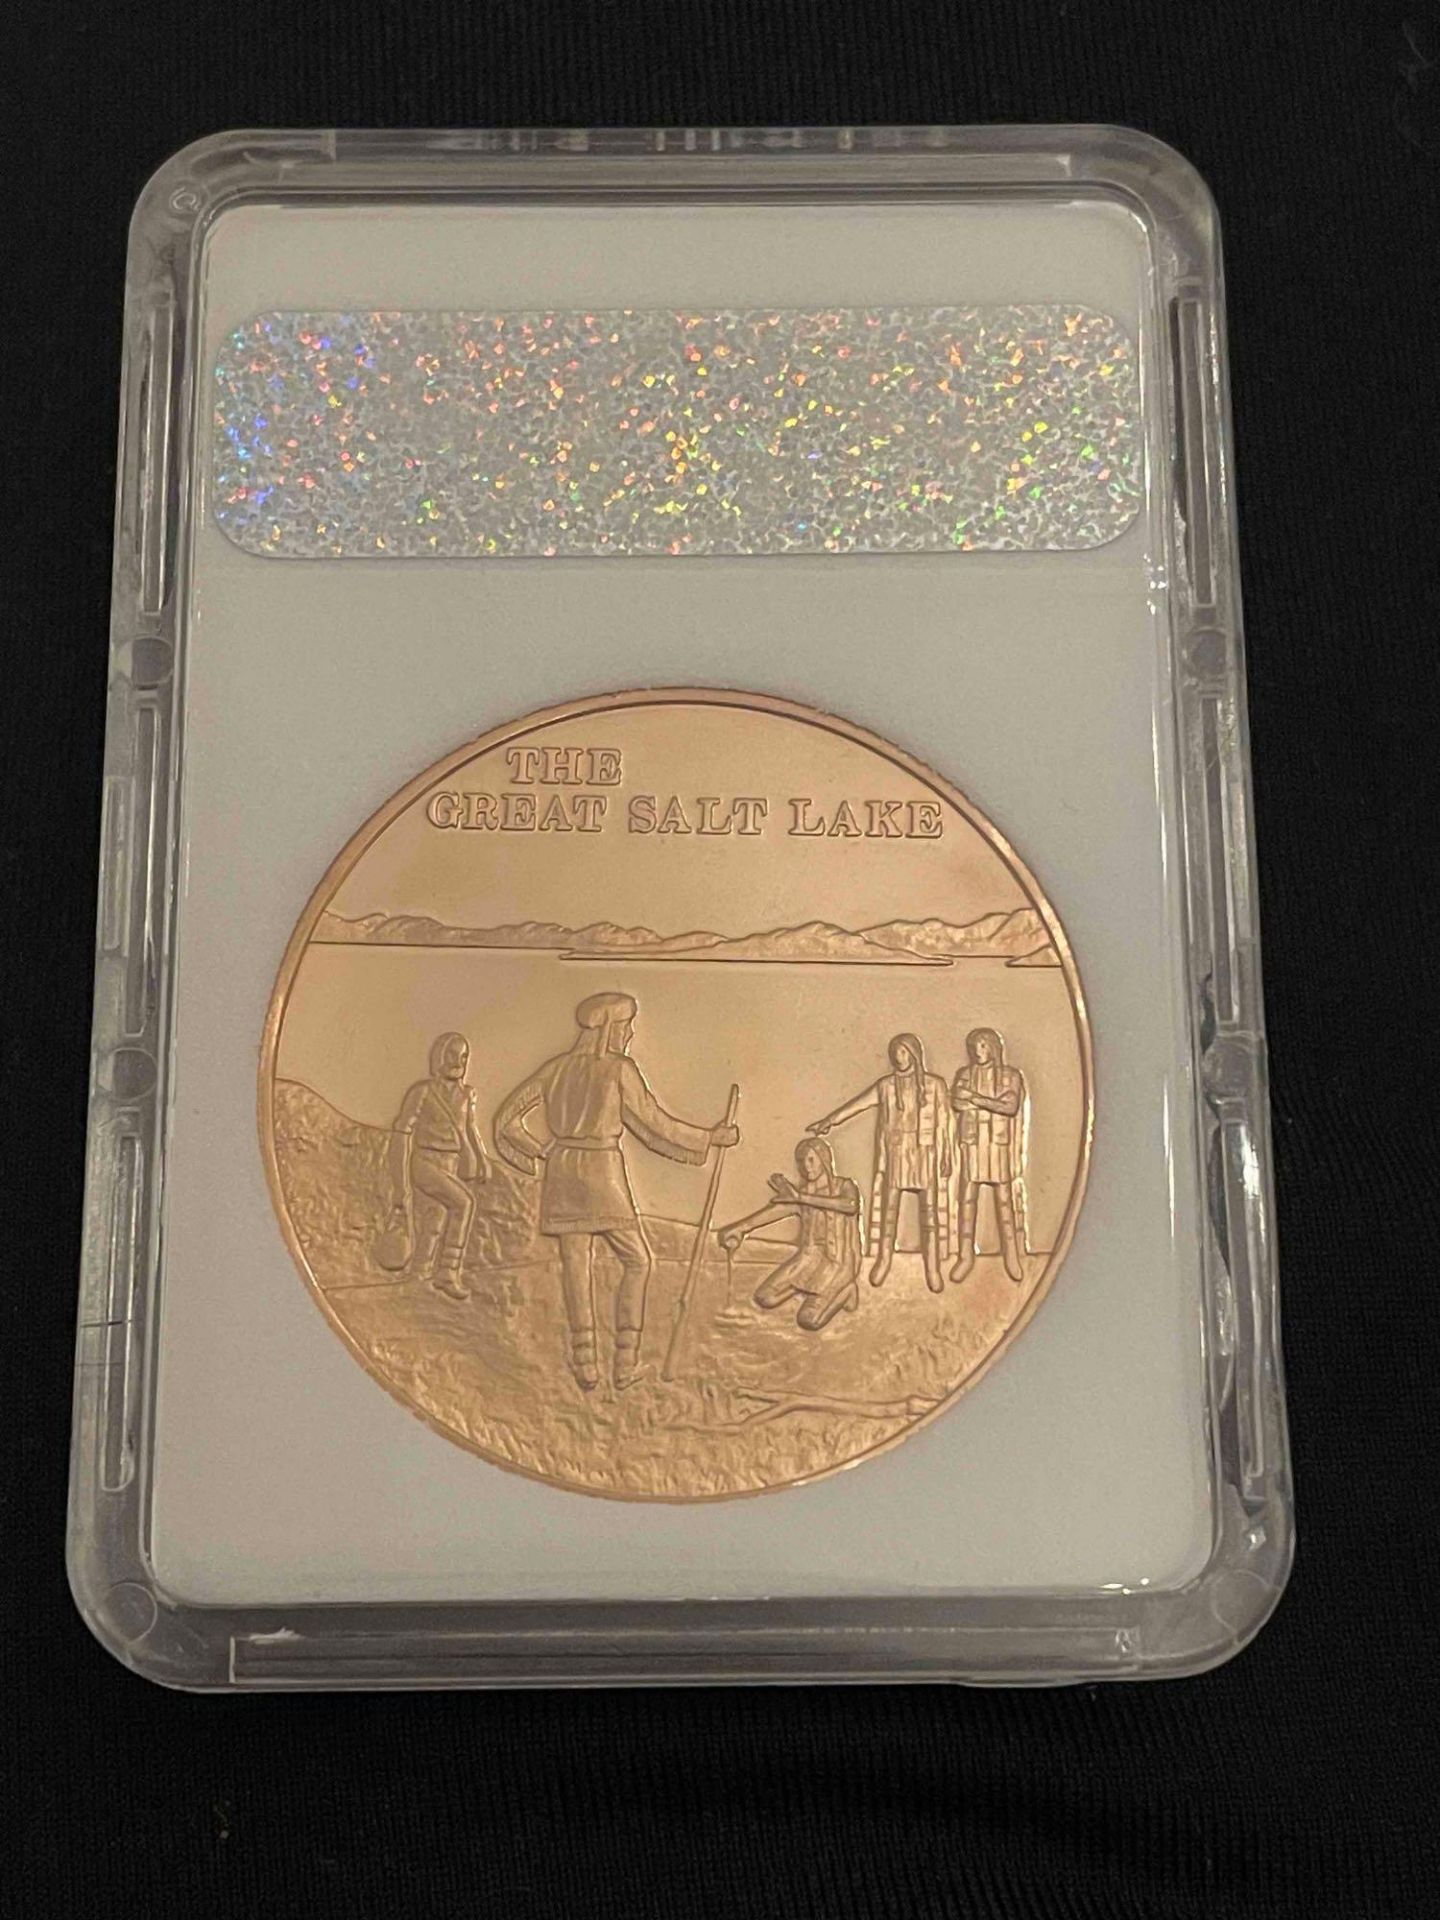 1974 Discovery of Great Salt Lake Coin - Image 3 of 3